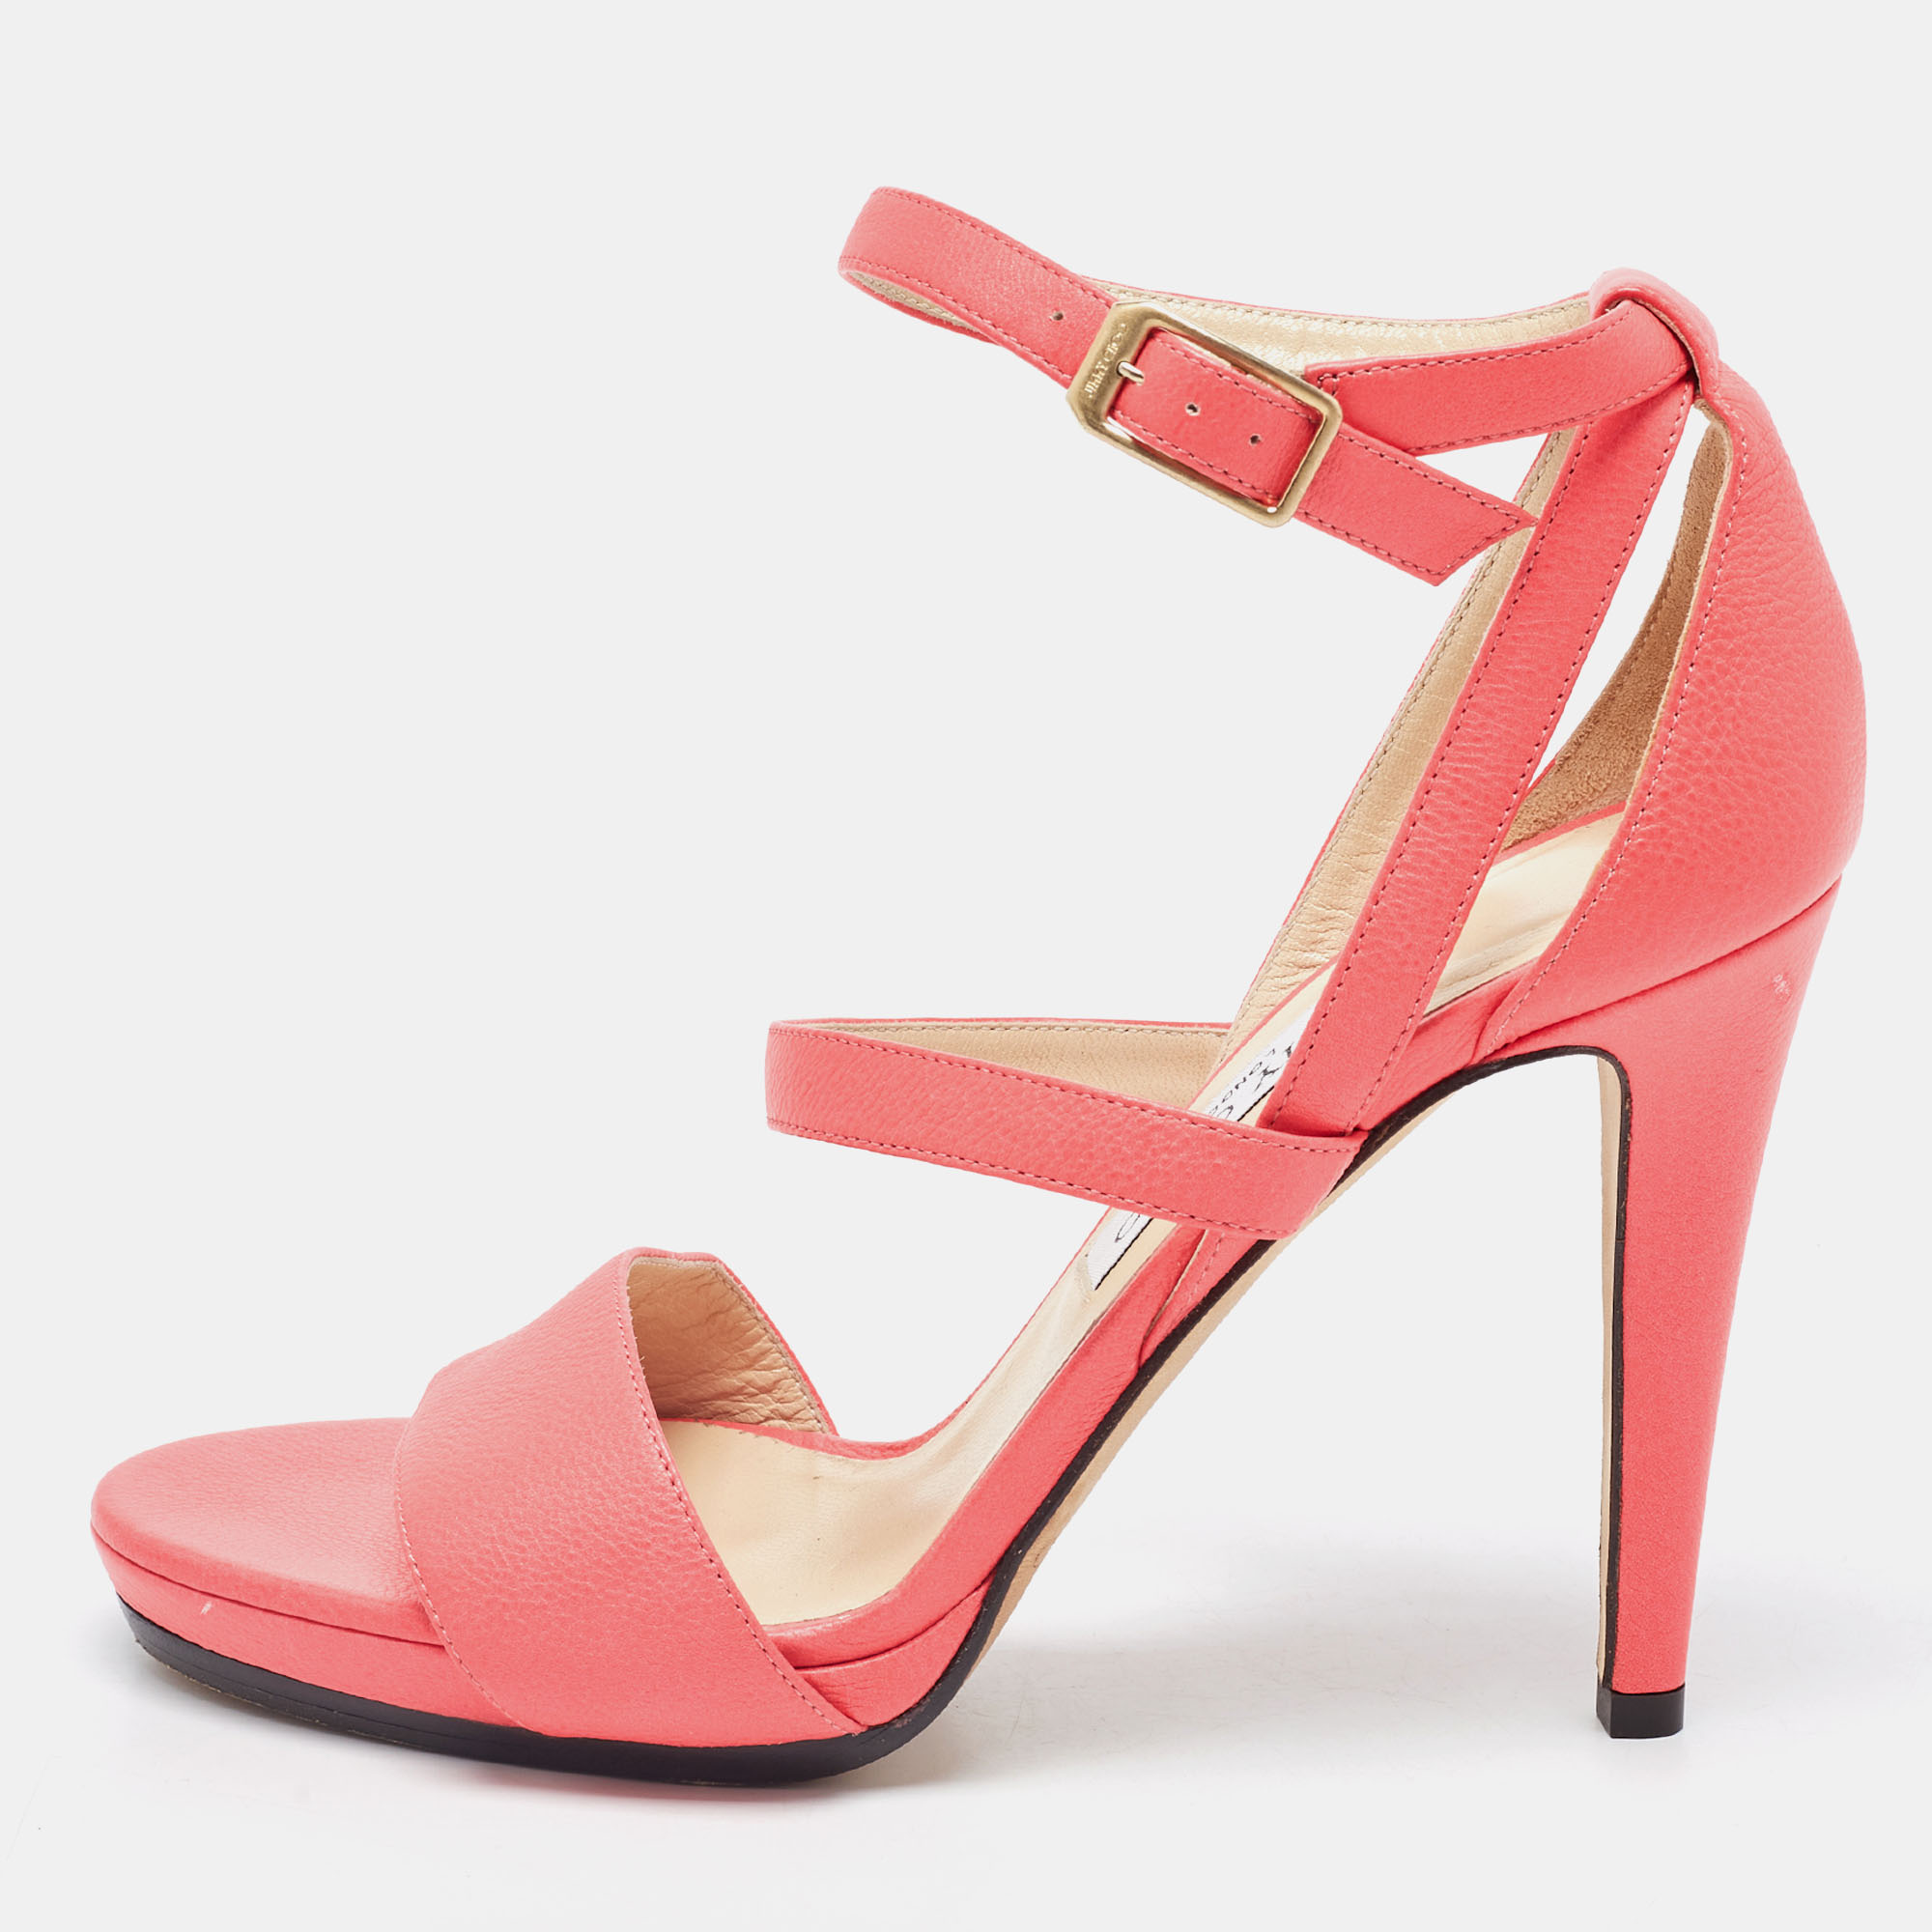 

Jimmy Choo Neon Pink Leather Strappy Sandals Size